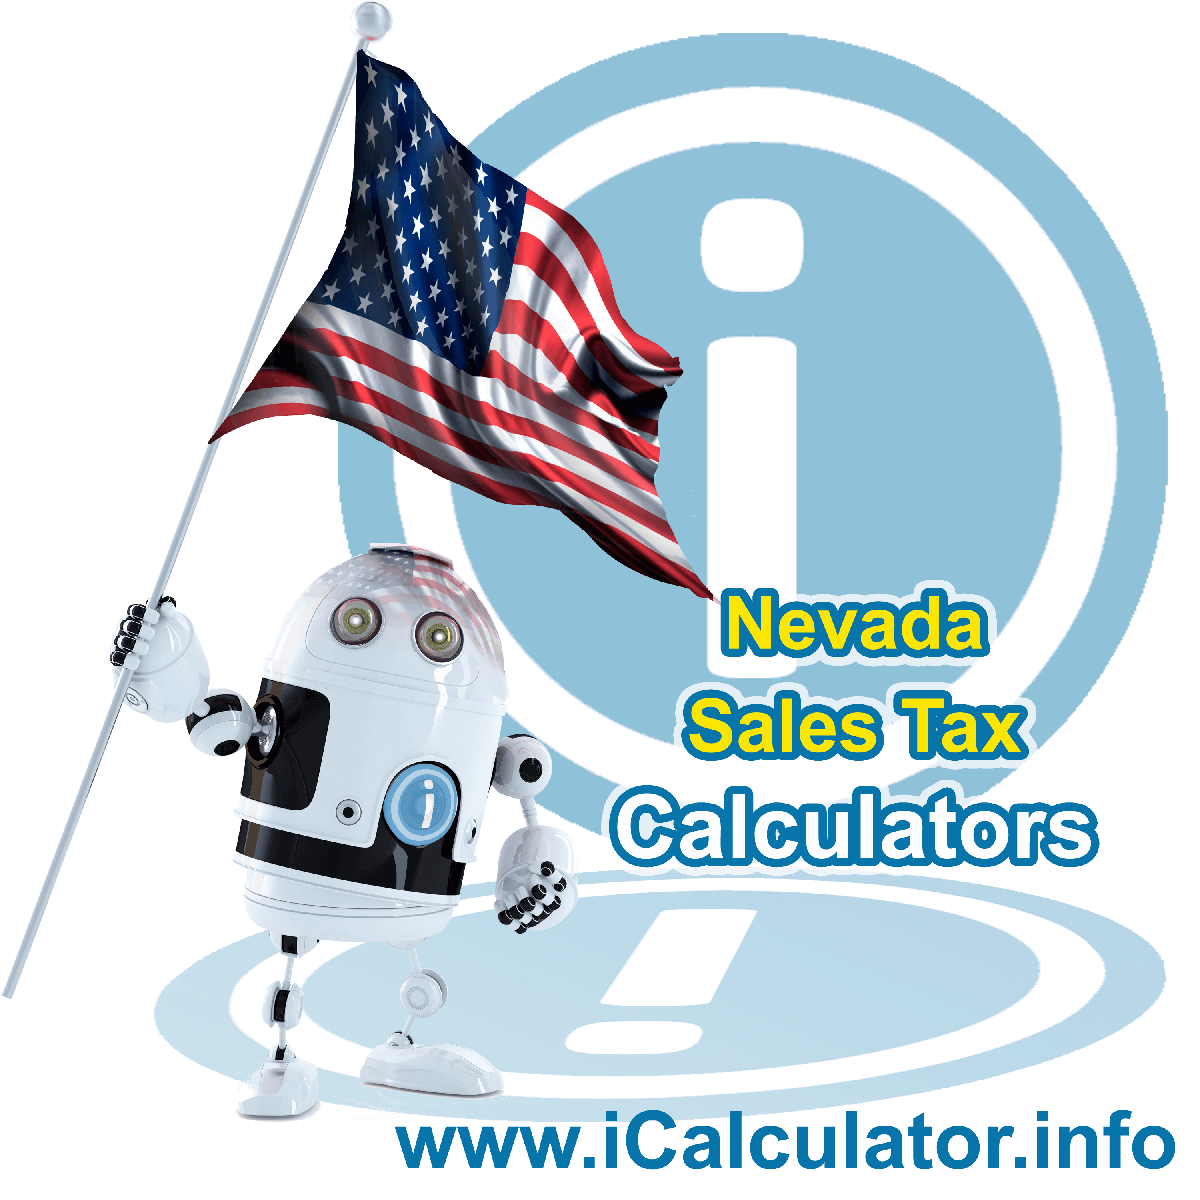 Mineral County Sales Rates: This image illustrates a calculator robot calculating Mineral County sales tax manually using the Mineral County Sales Tax Formula. You can use this information to calculate Mineral County Sales Tax manually or use the Mineral County Sales Tax Calculator to calculate sales tax online.